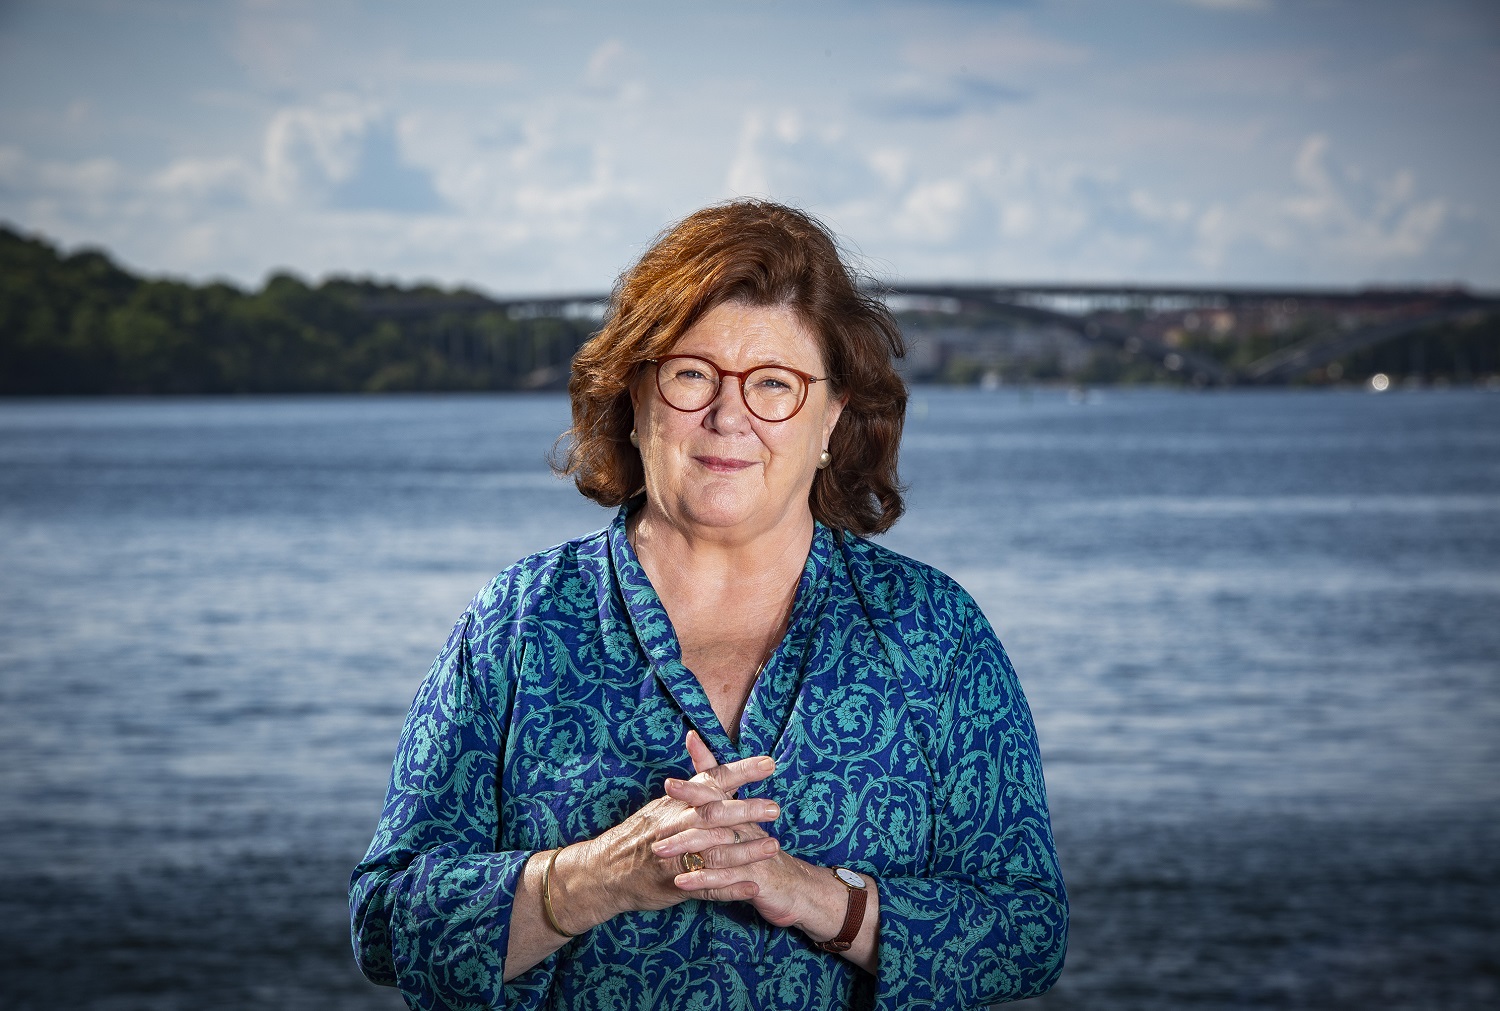 Woman with shoulder-length brown hair and glasses squints into camera in front of urban lake landscape.